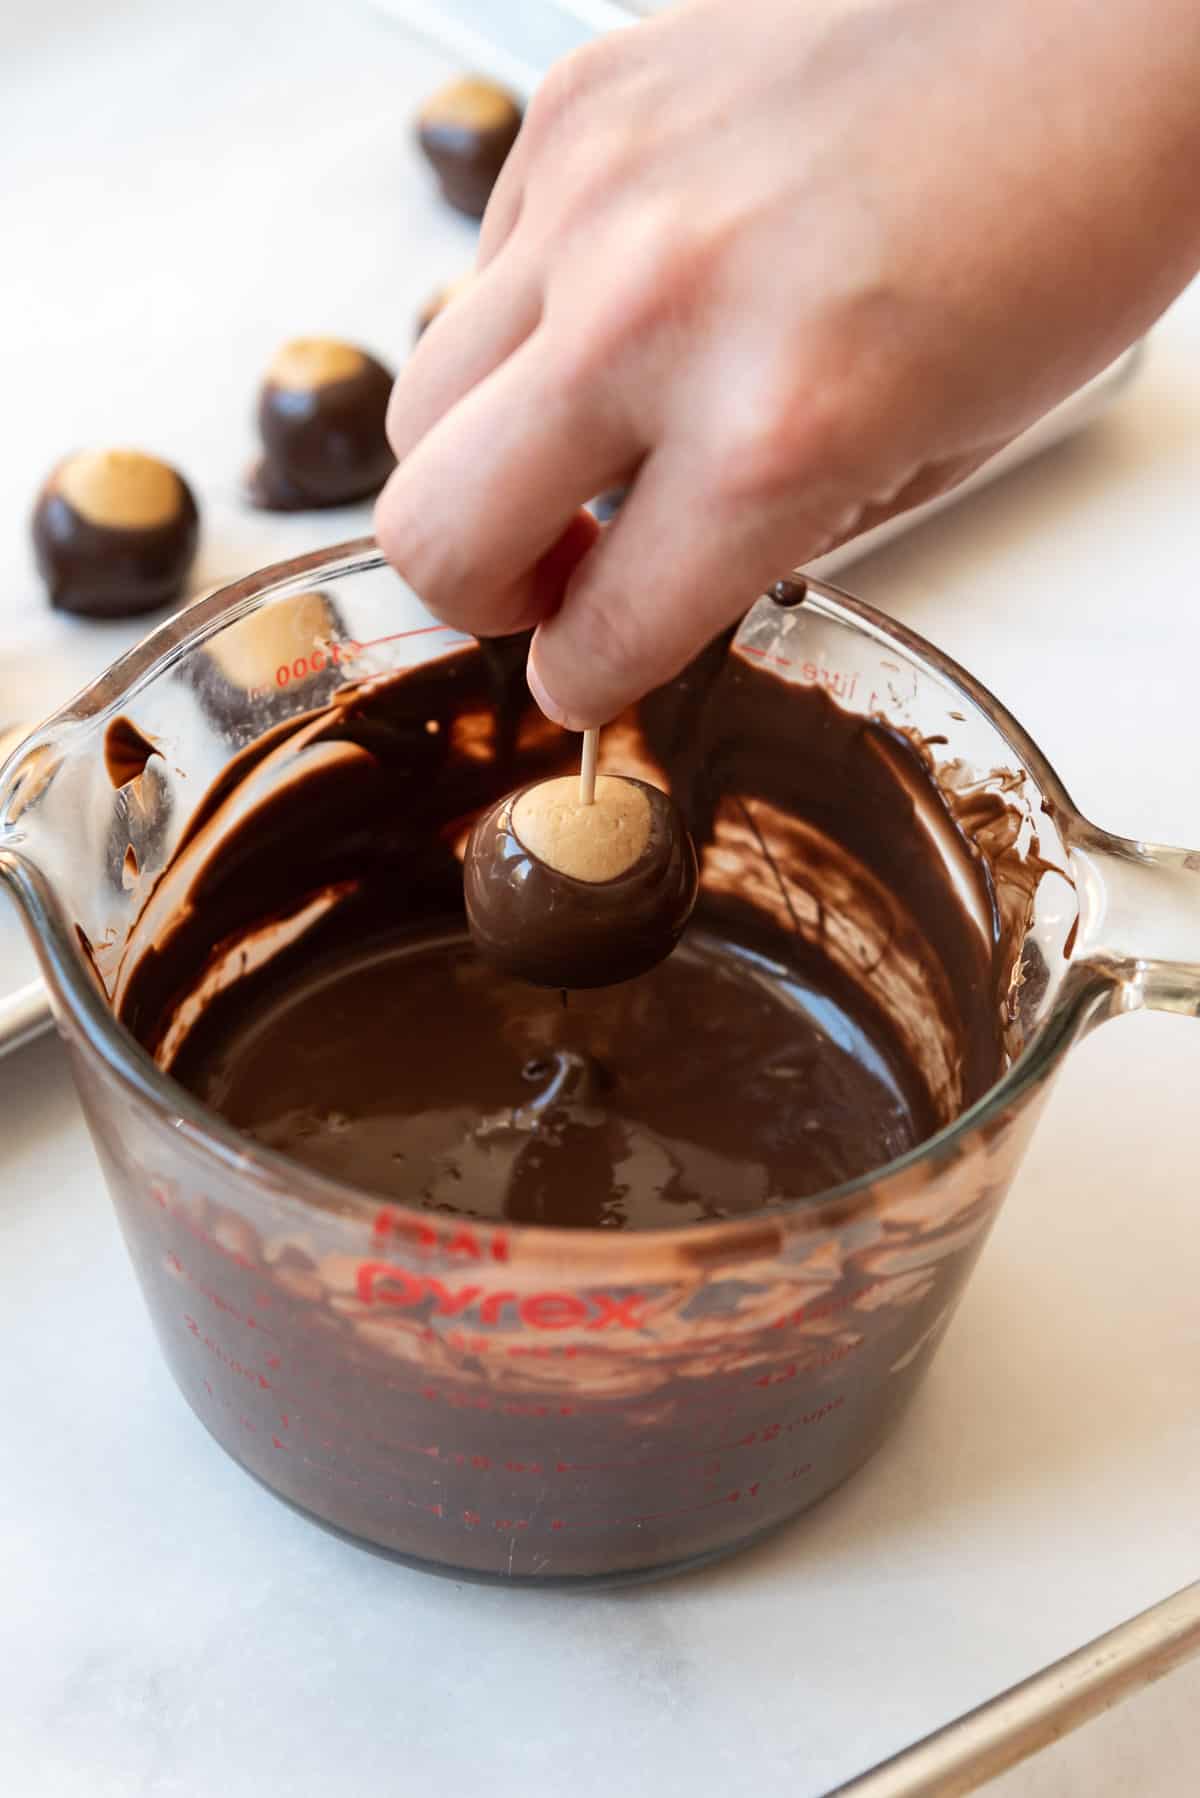 Lifting a peanut butter ball out of melted chocolate with a toothpick to make a buckeye.